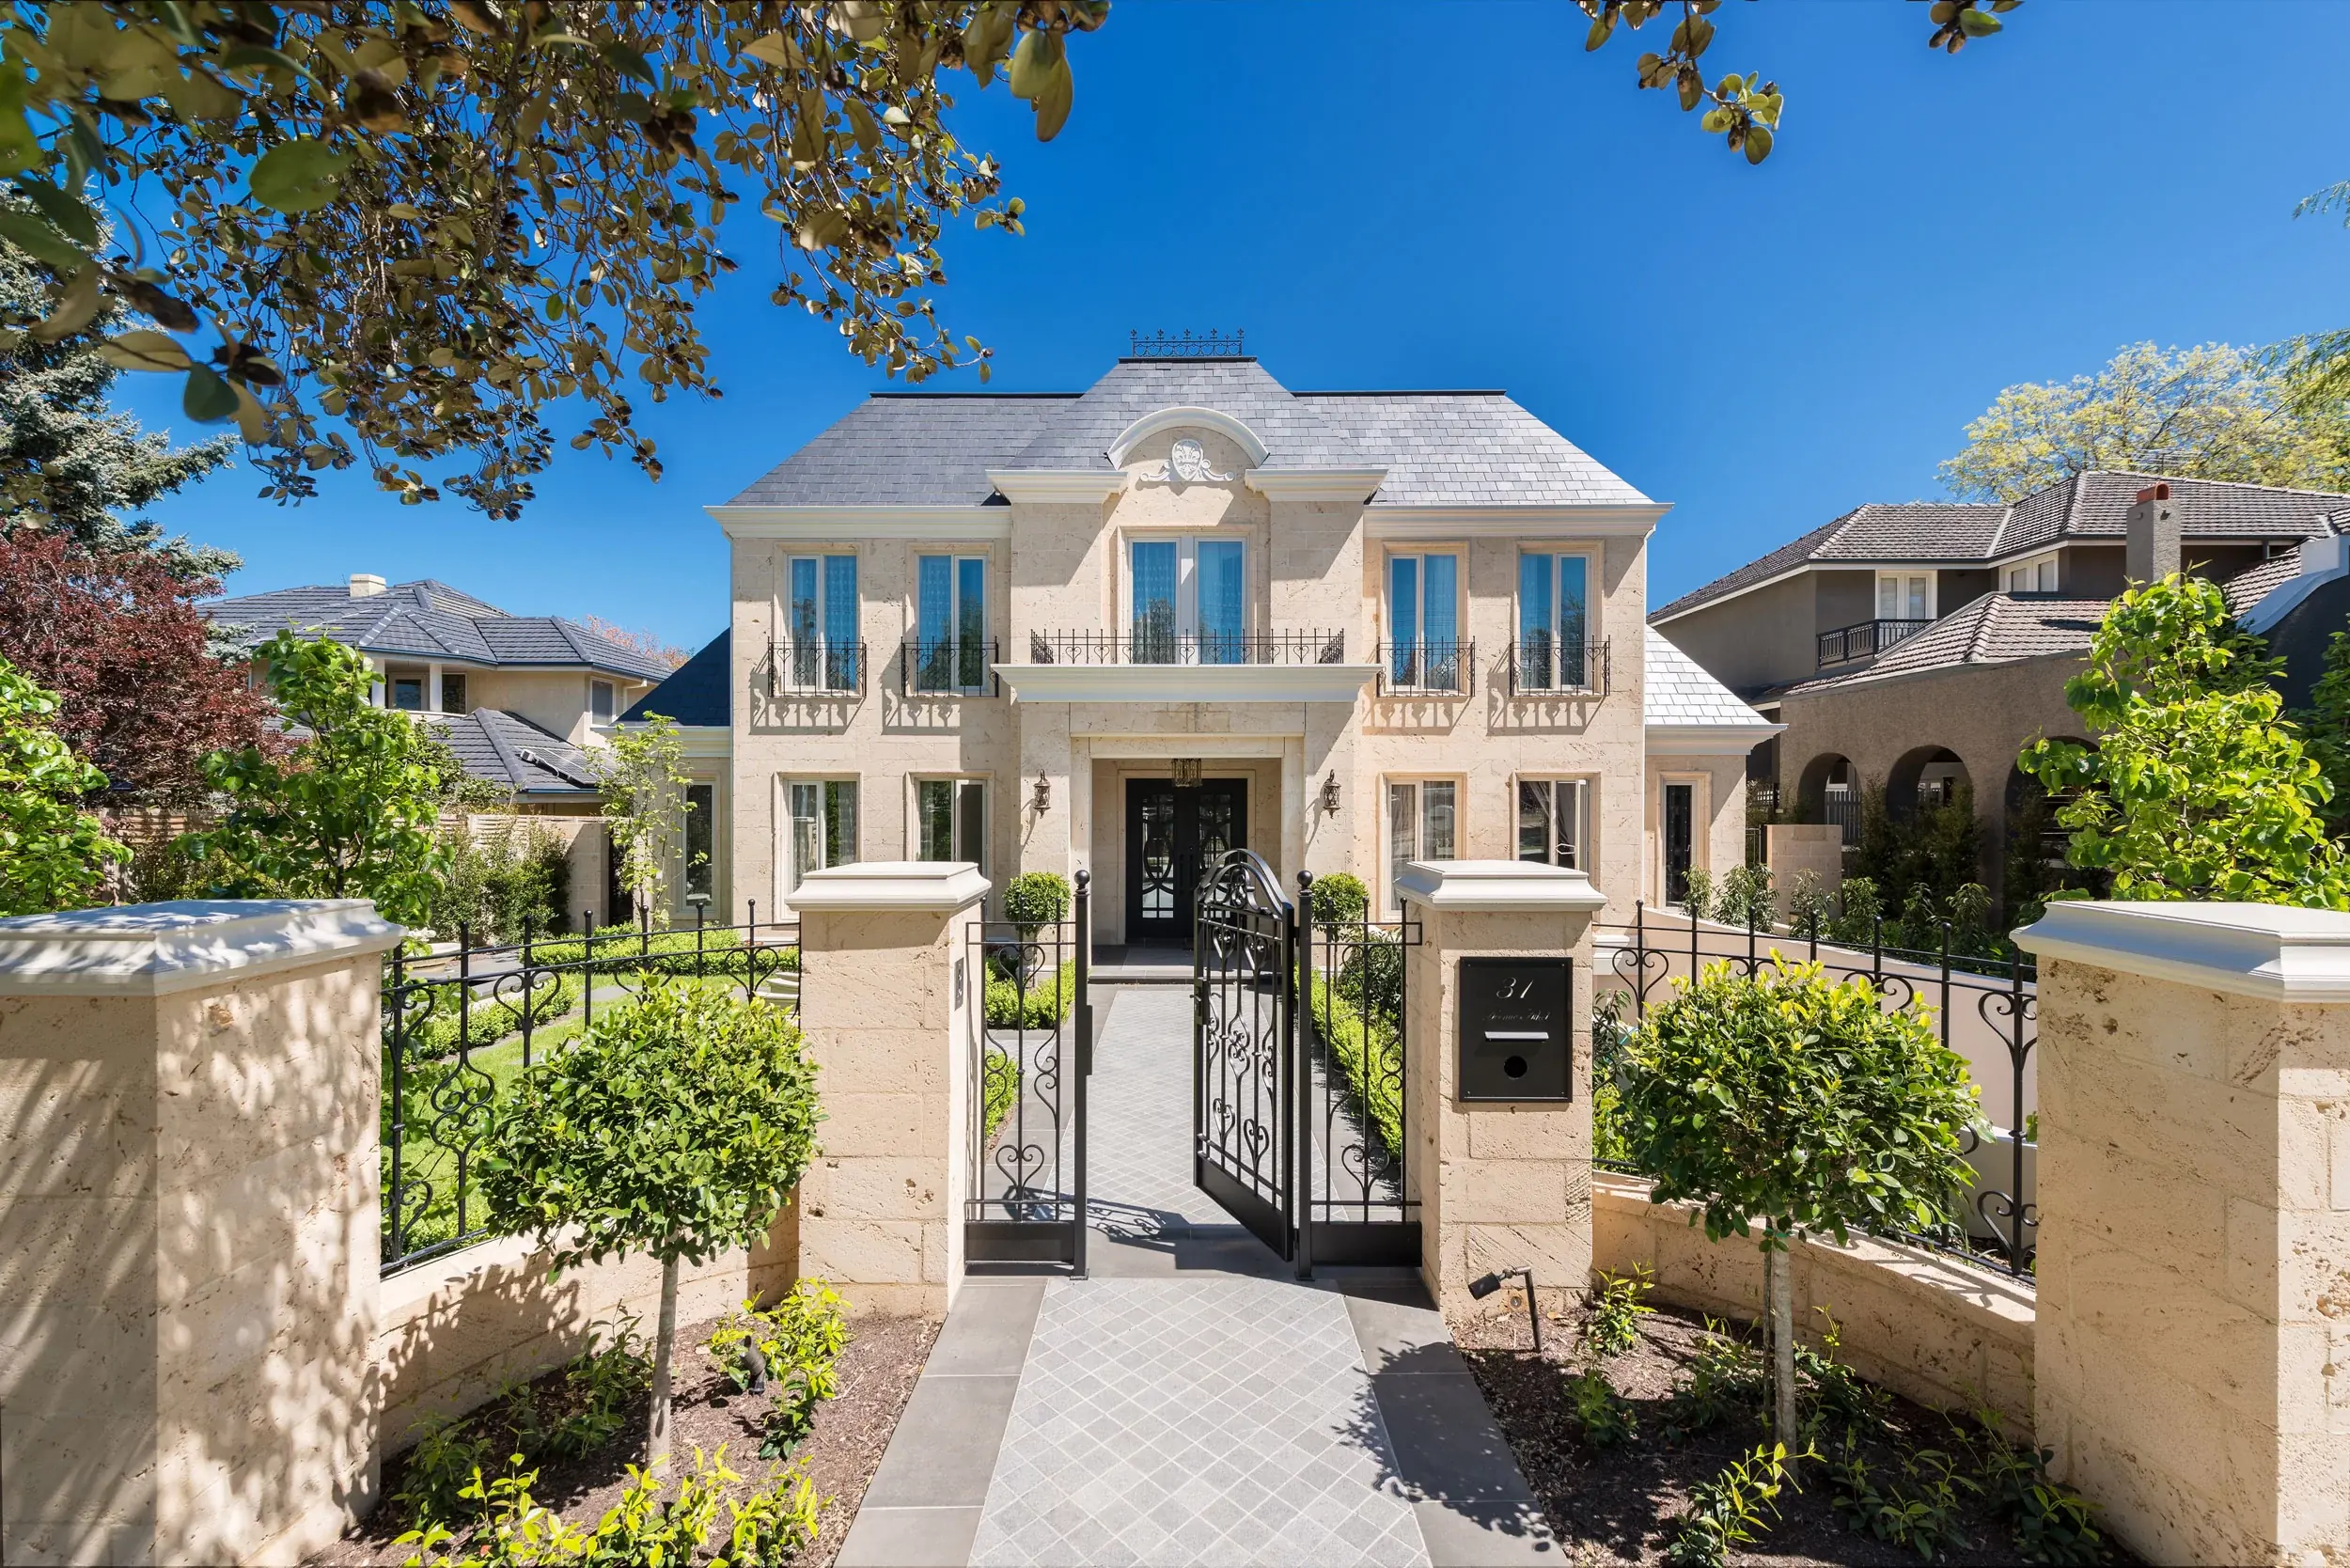 A luxury Englehart residence pictured from outside its front gate.